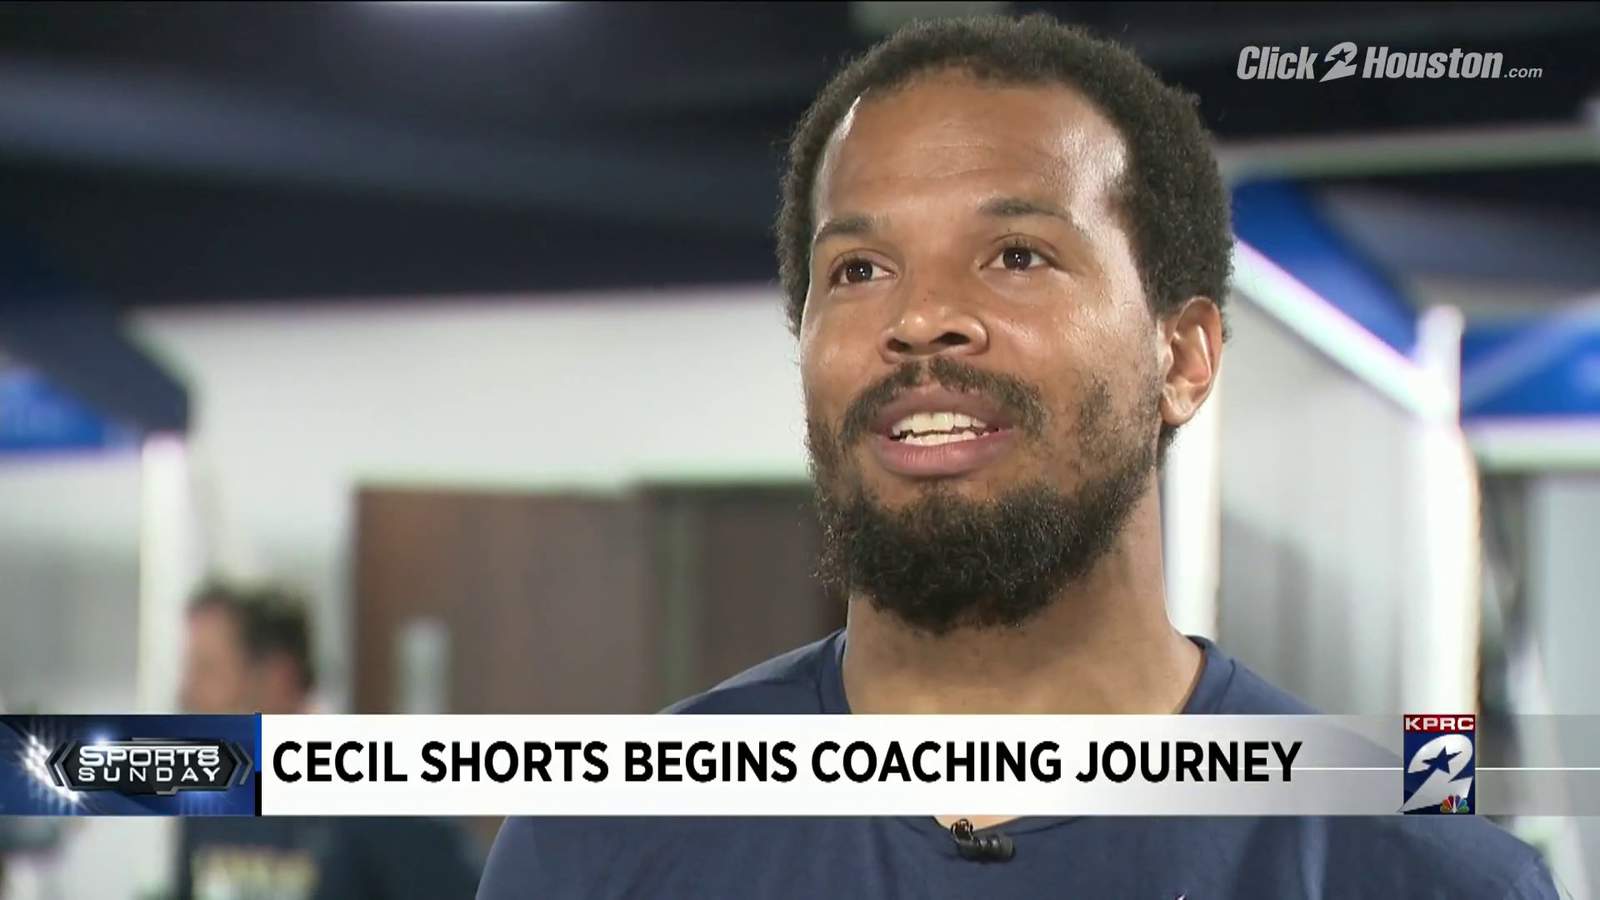 Former Texans receiver Cecil Shorts III begins coaching journey